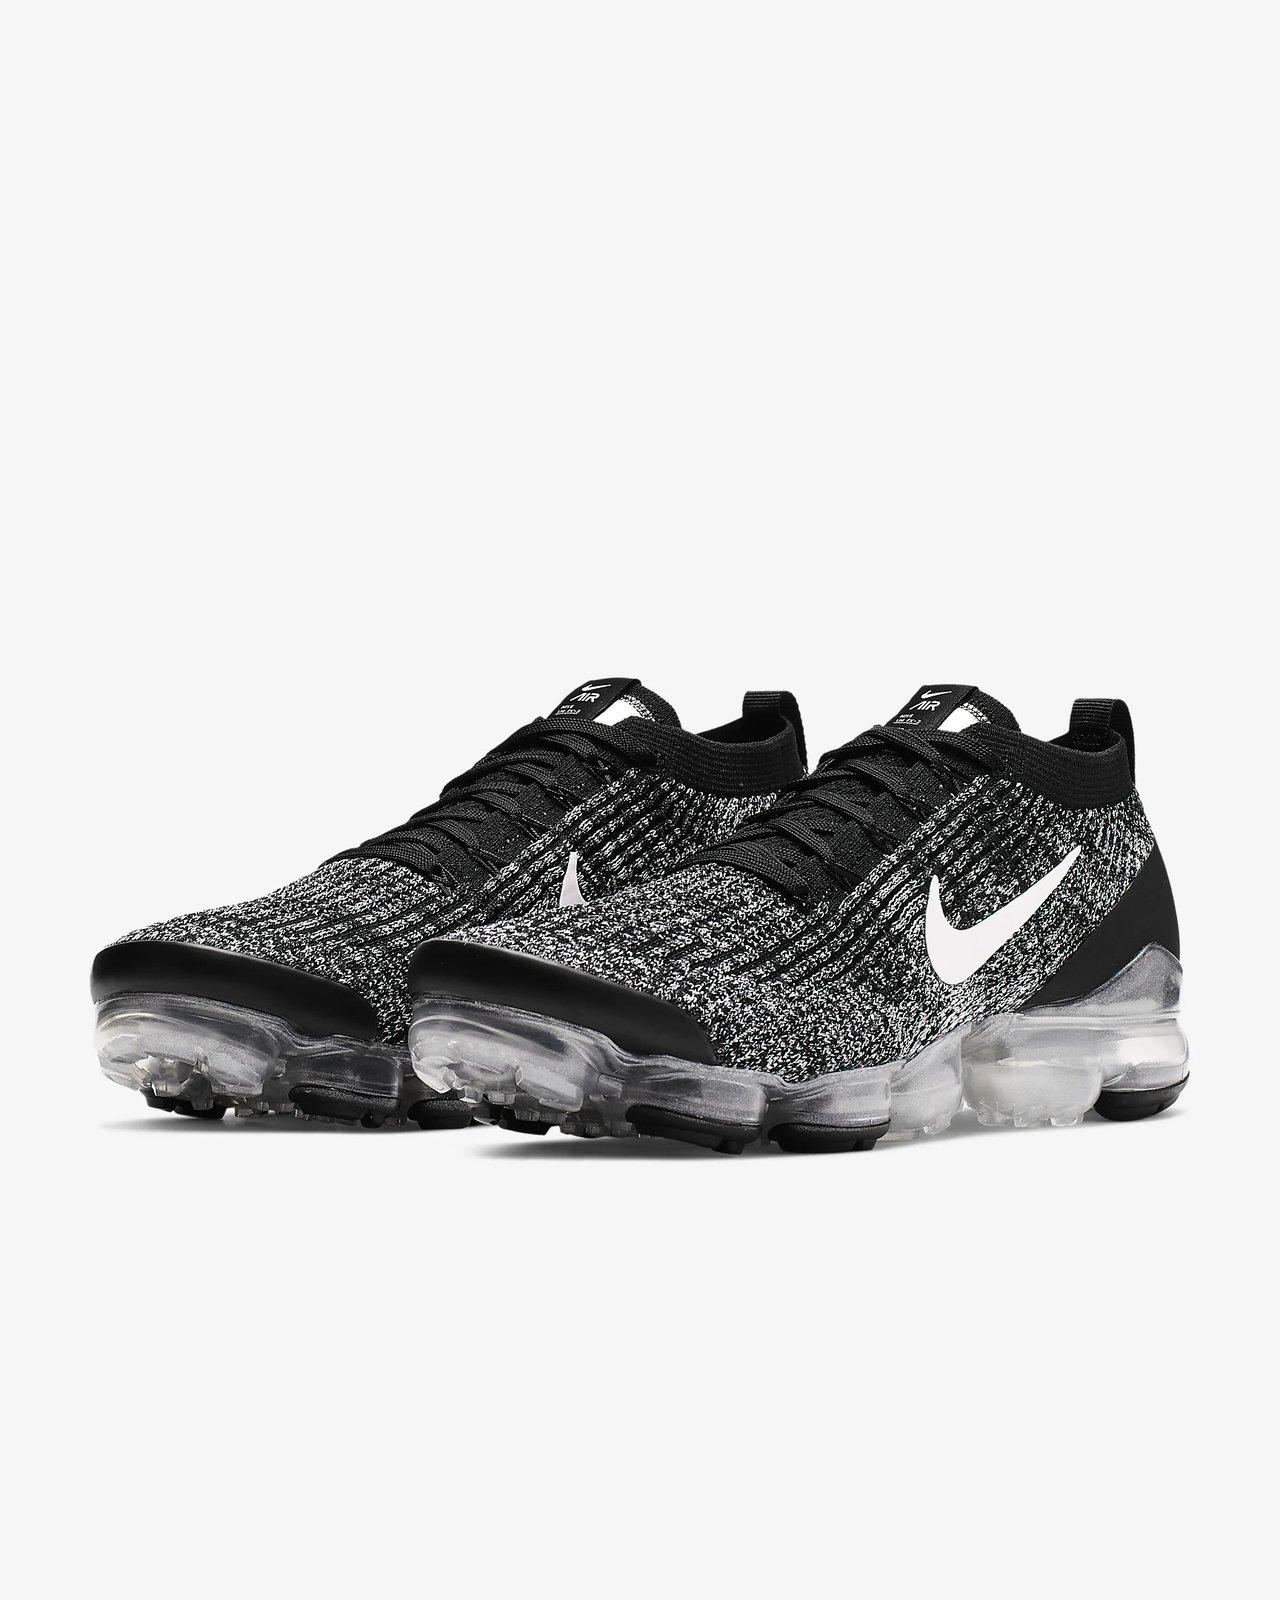 vapormax flyknit 3 black and white